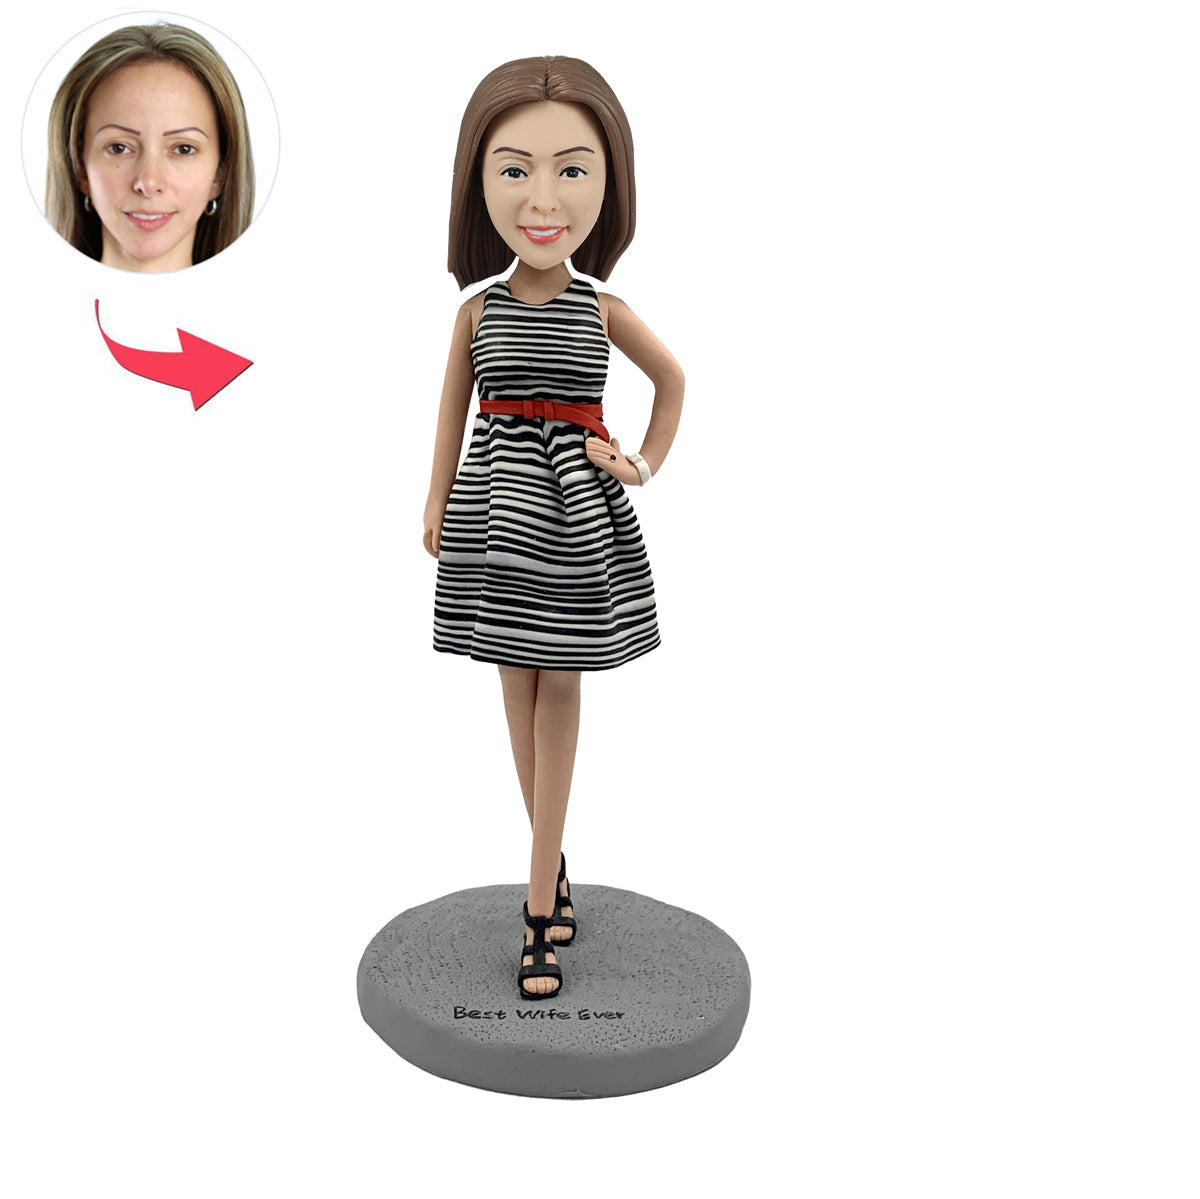 Female Bobble Head Doll with Striped Dress